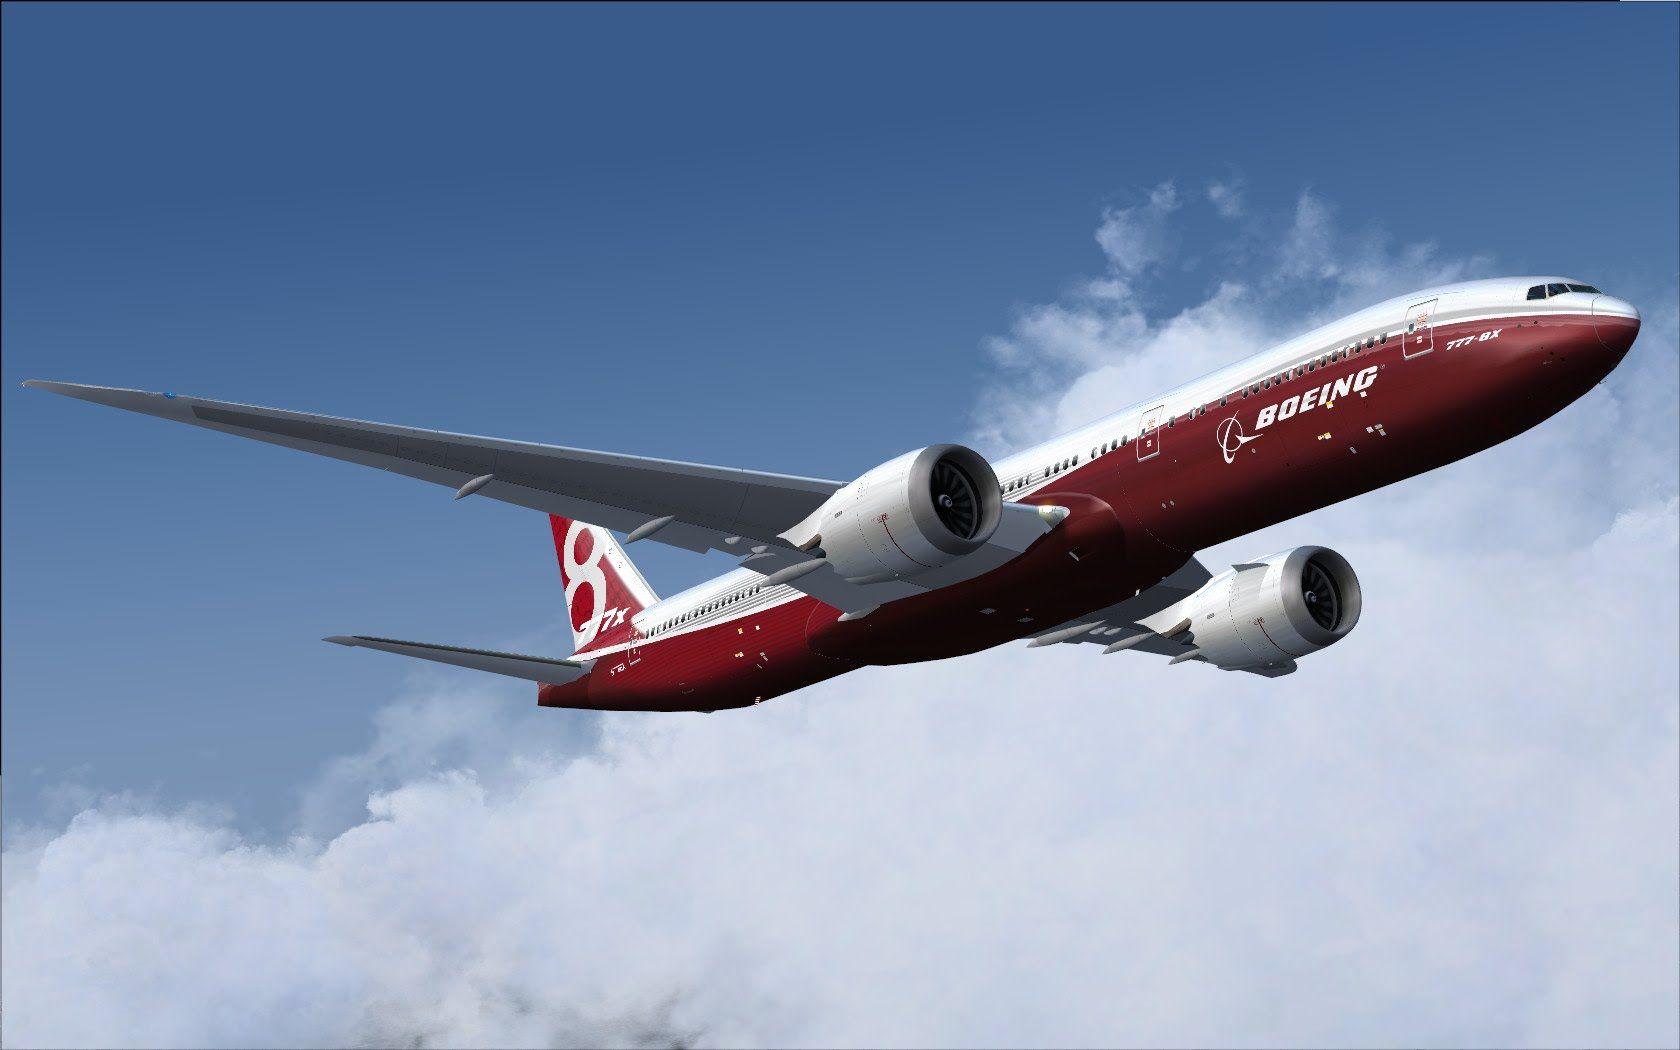 IAI Gears to Begin Delivery of 777X Assemblies. Israel